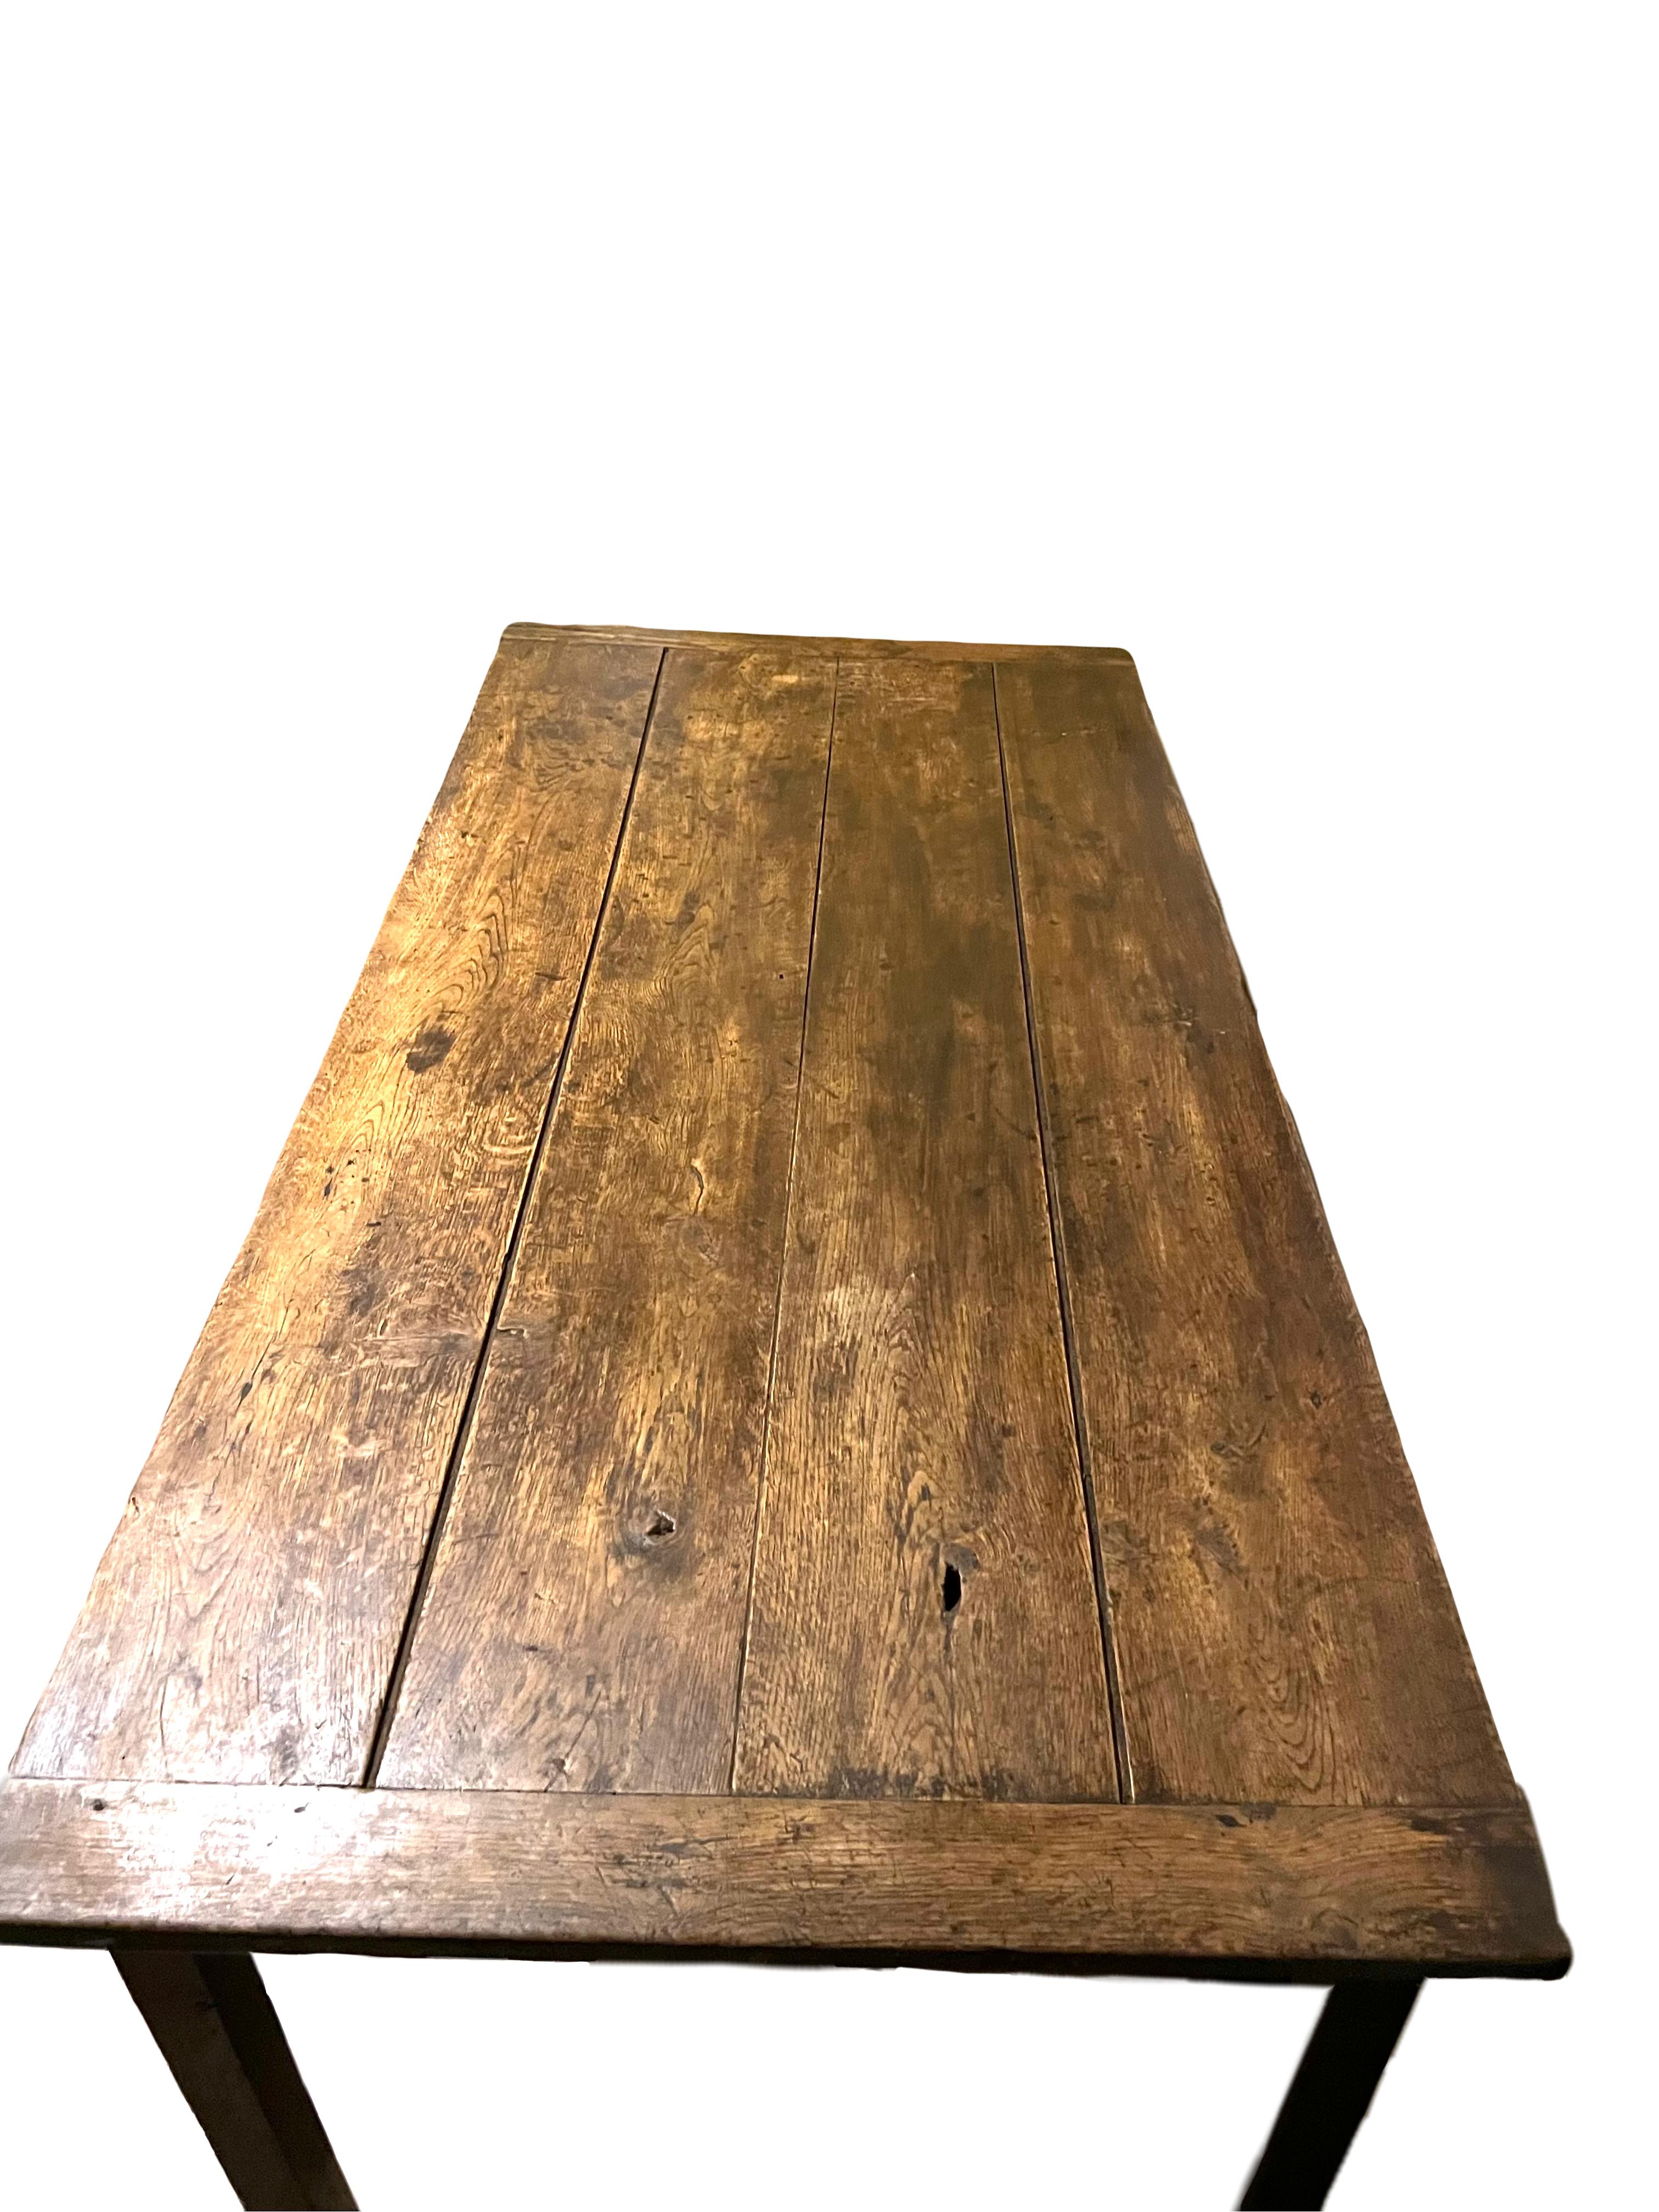 Rustic French 19th-century farmhouse table For Sale 5